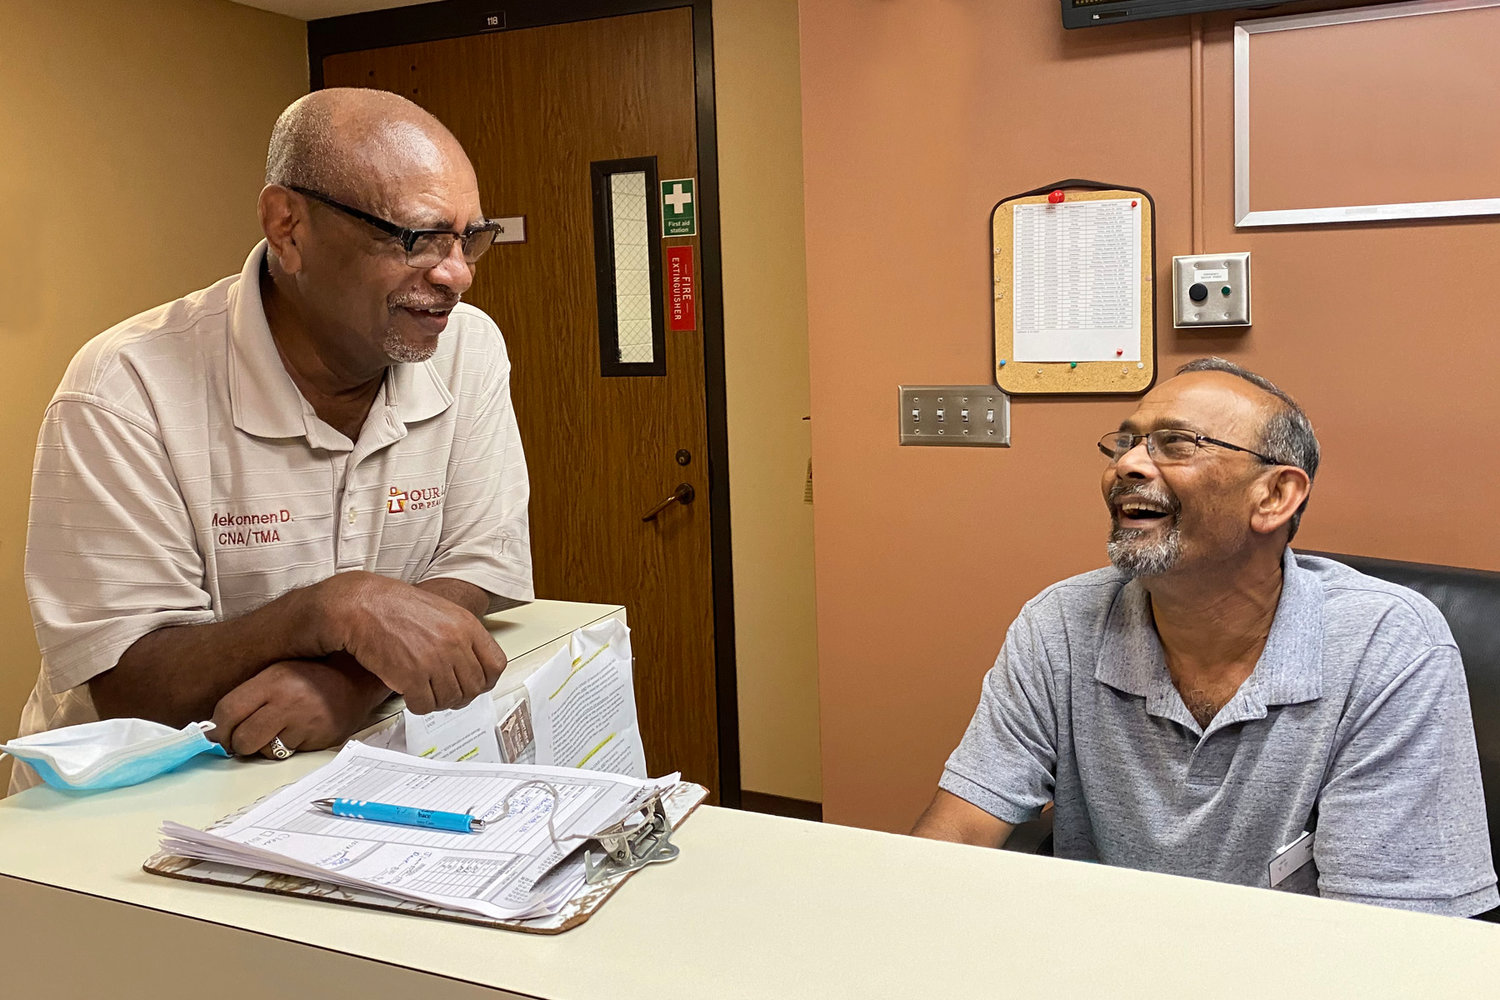 Mekonnen Dori (left) and Hari Pal (right) are longtime employees of Our Lady of Peace Hospice. Both have continued to work fulltime past the usual retirement age. Pondering his own eventual retirement, Mekonnen said, “I don’t know, maybe if Hari retires, then it will be time.” (Photo by Margie O’Loughlin)